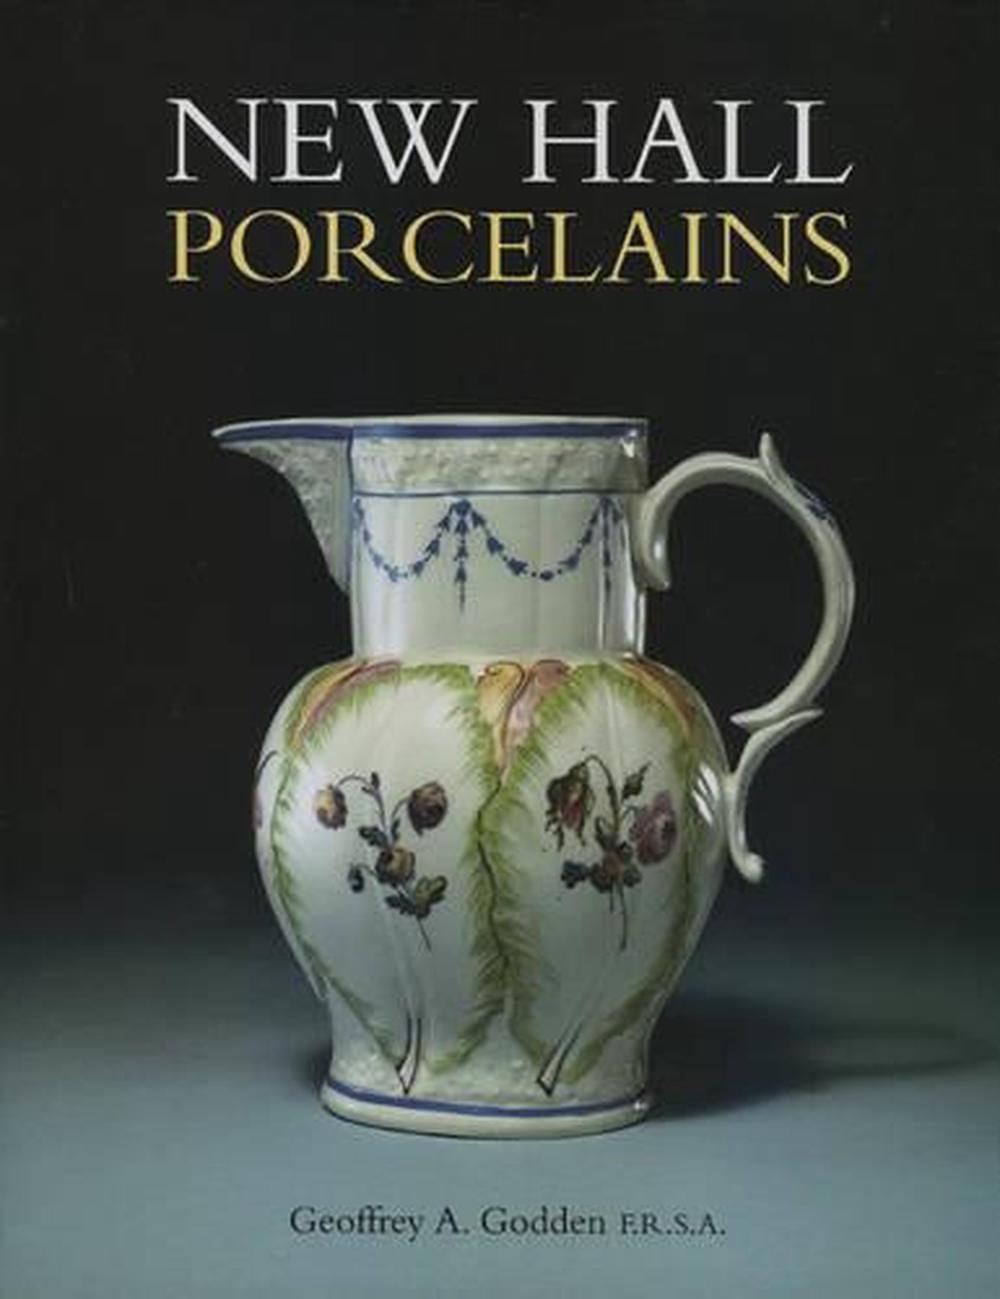 New Hall Porcelains by Geoffrey A. Godden, Hardcover